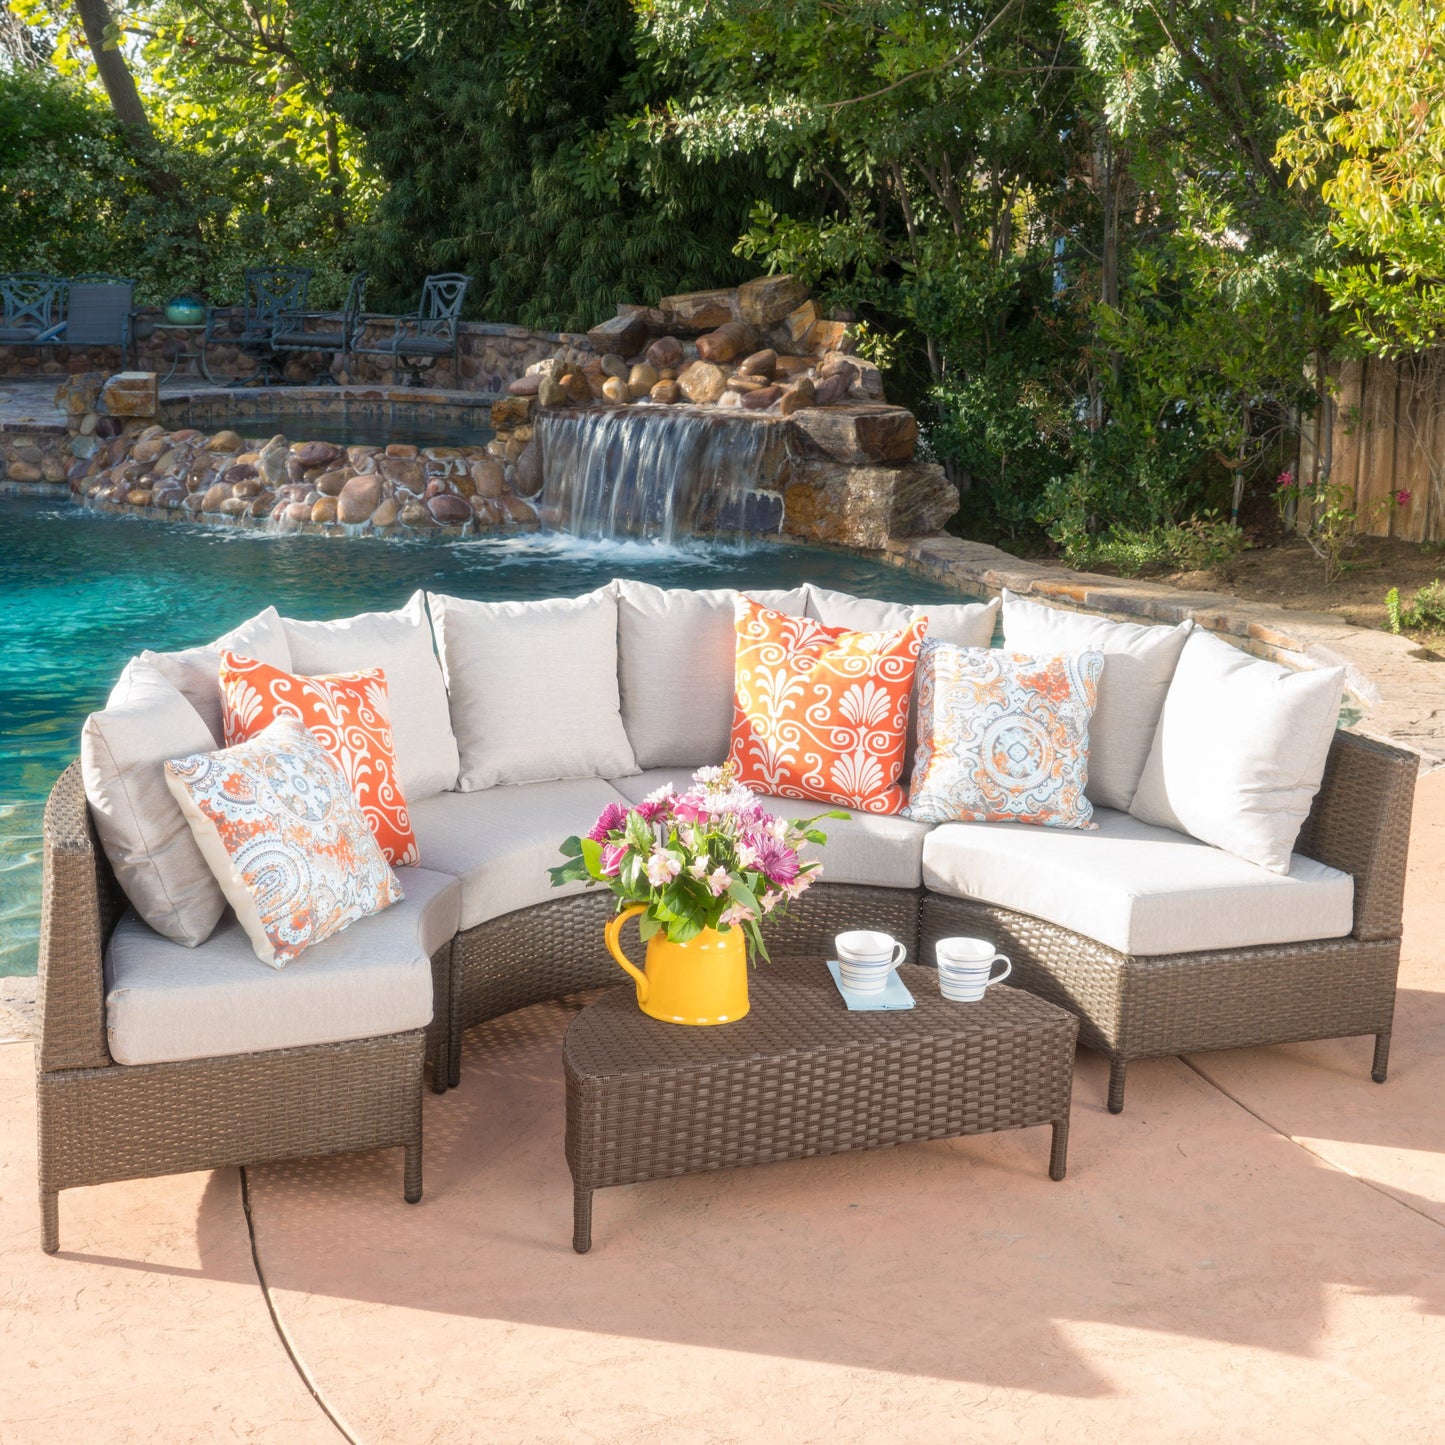 Alacati Outdoor 5-Piece Wicker Sofa Set with Water Resistant Cushions